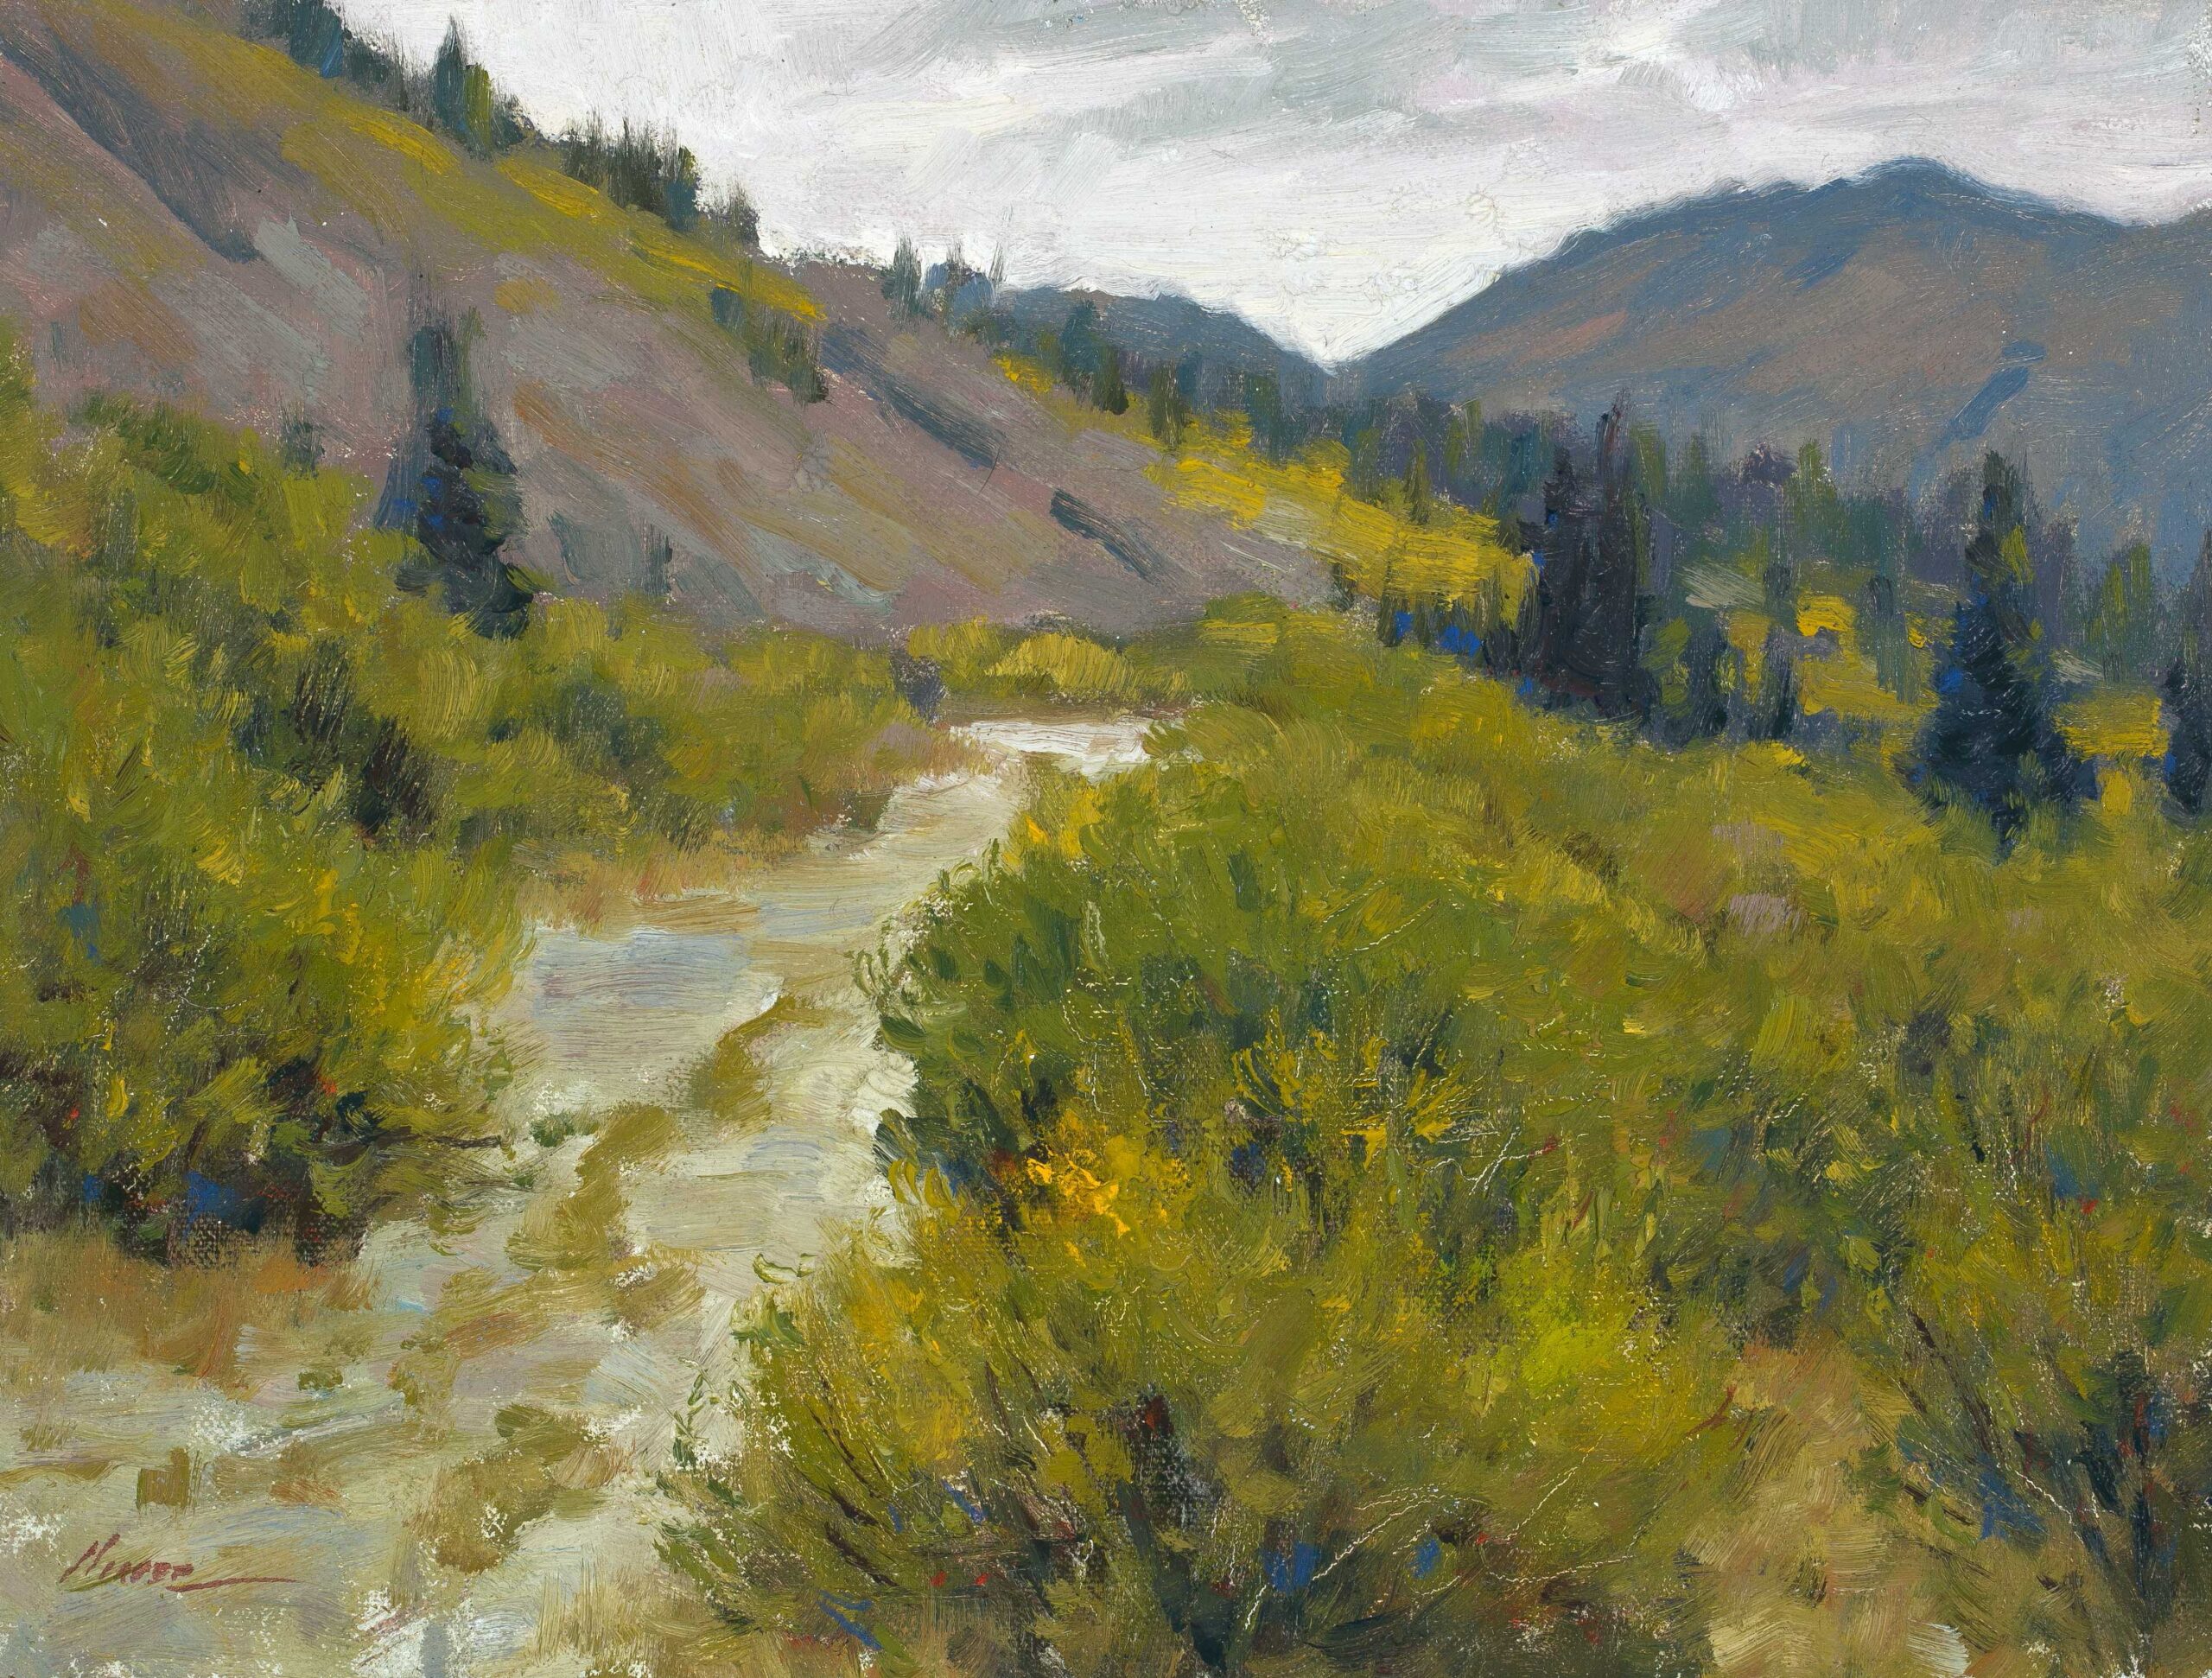 Lorenzo Chavez, "Hint of Autumn," Undated, oil, 9 x 12 in., Collection the artist, Plein air